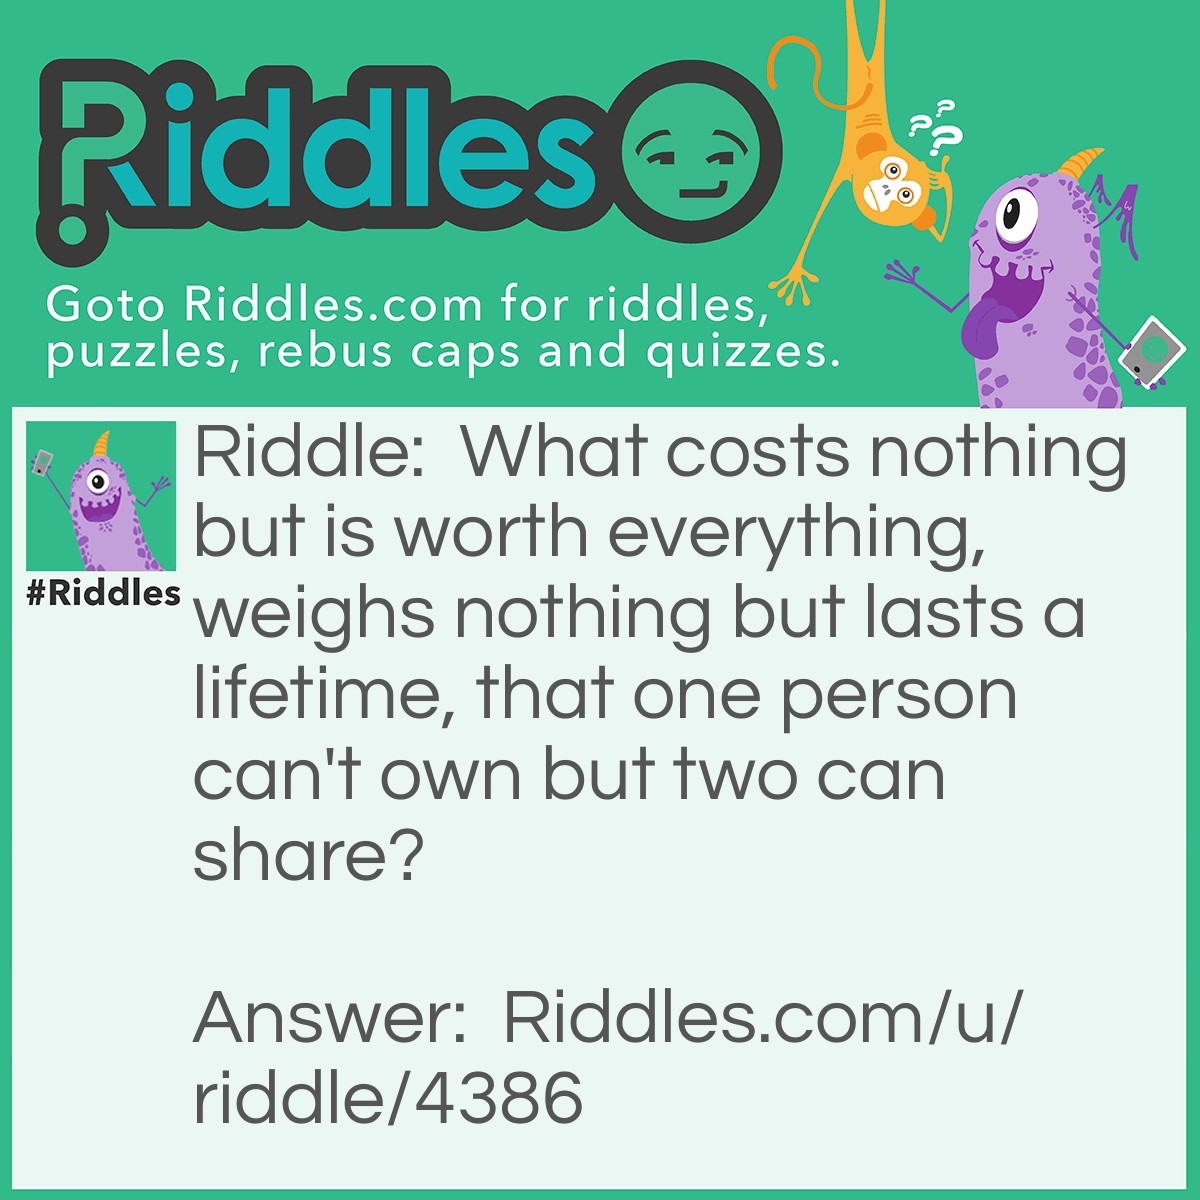 Riddle: What costs nothing but is worth everything, weighs nothing but lasts a lifetime, that one person can't own but two can share? Answer: Love. ❤️